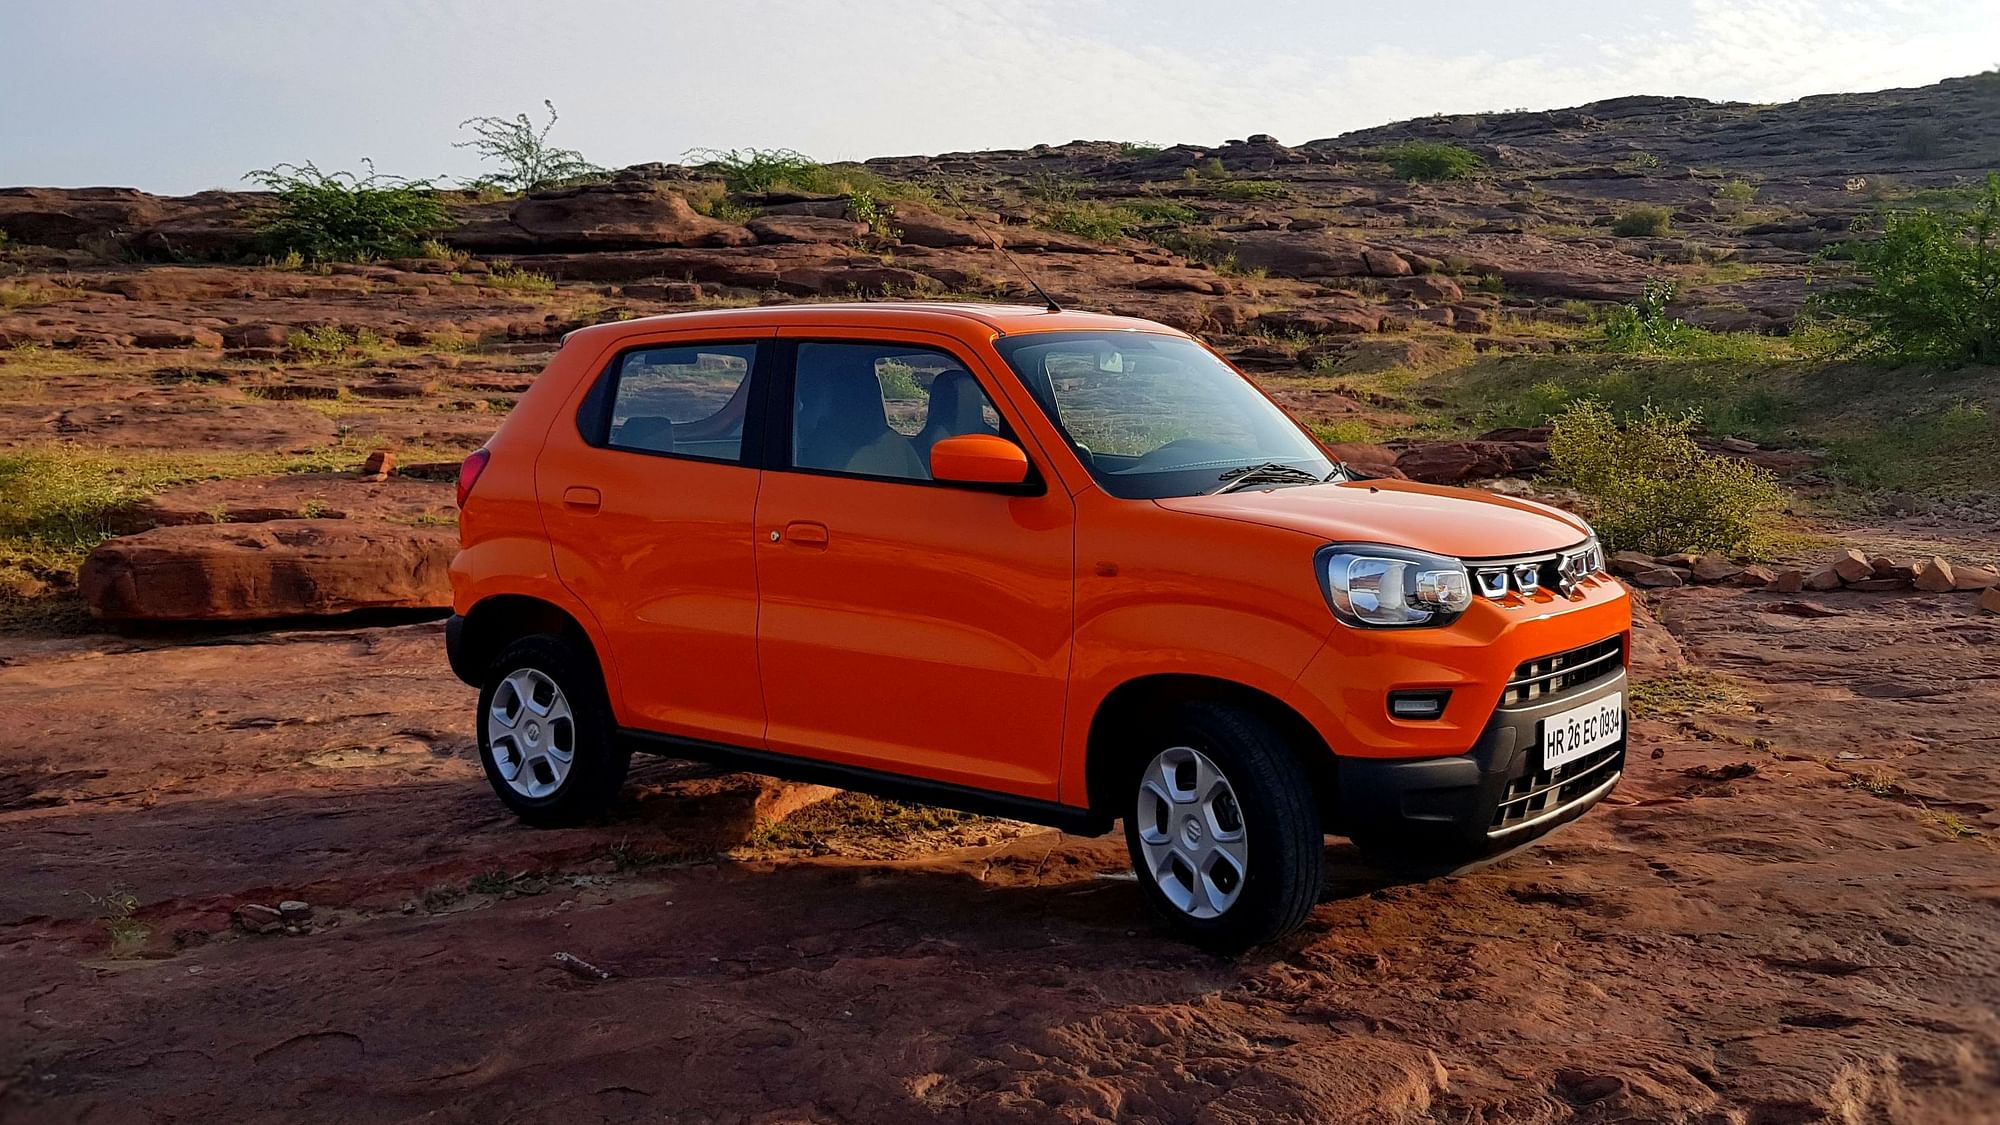 The Maruti Suzuki S-Presso is priced between Rs 3.69 lakh and Rs 4.91 lakh ex-showroom.